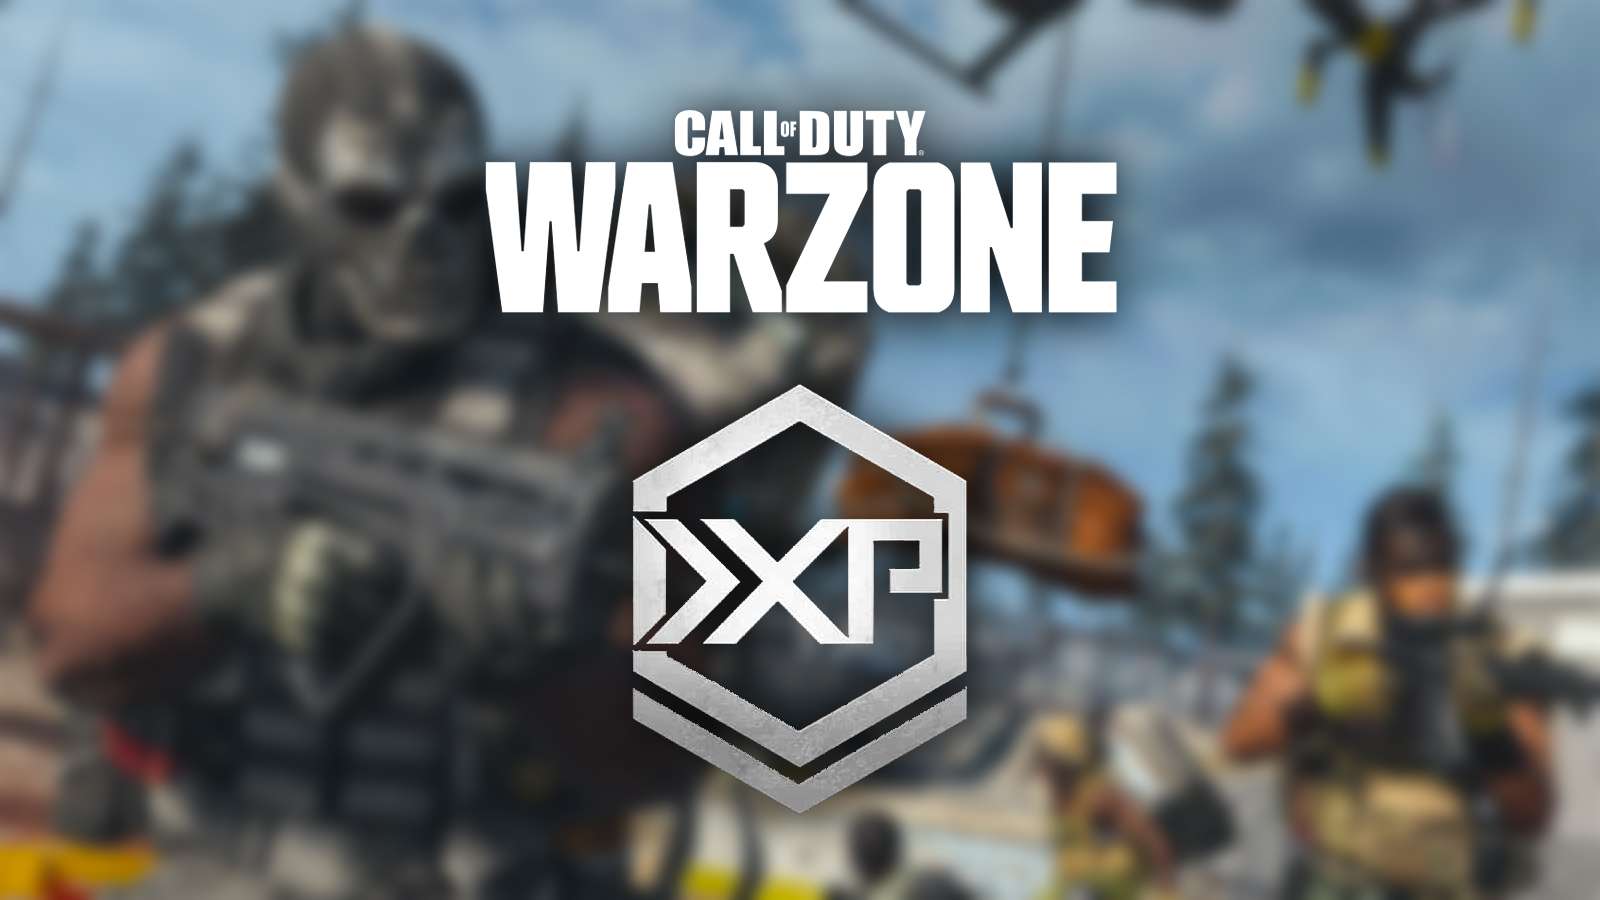 Call of Duty Warzone XP